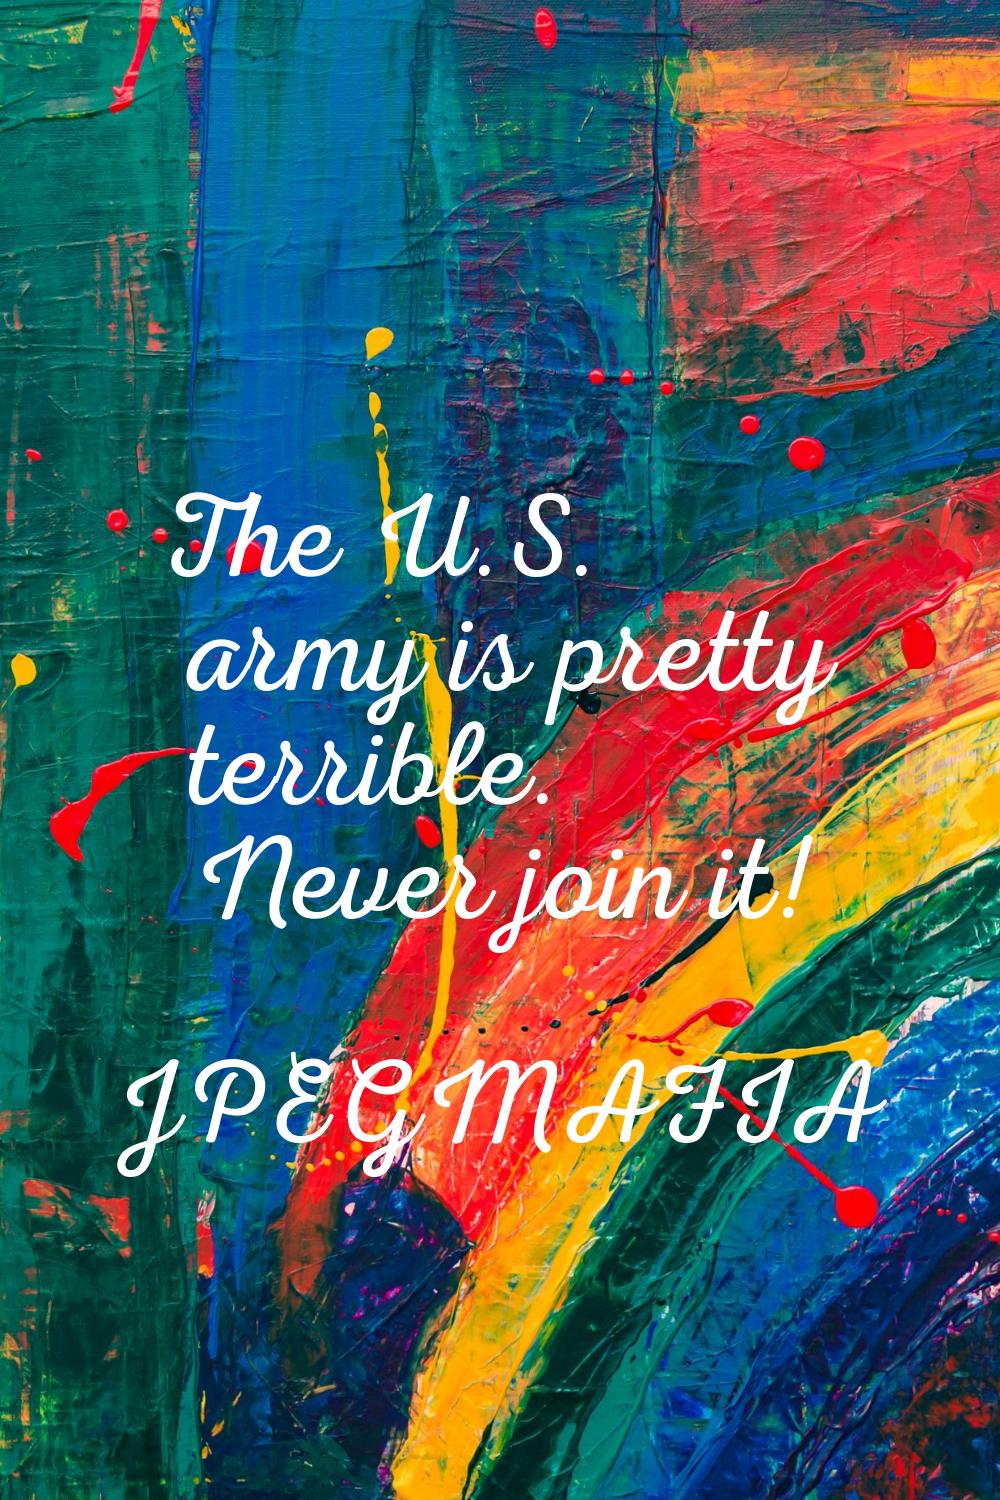 The U.S. army is pretty terrible. Never join it!